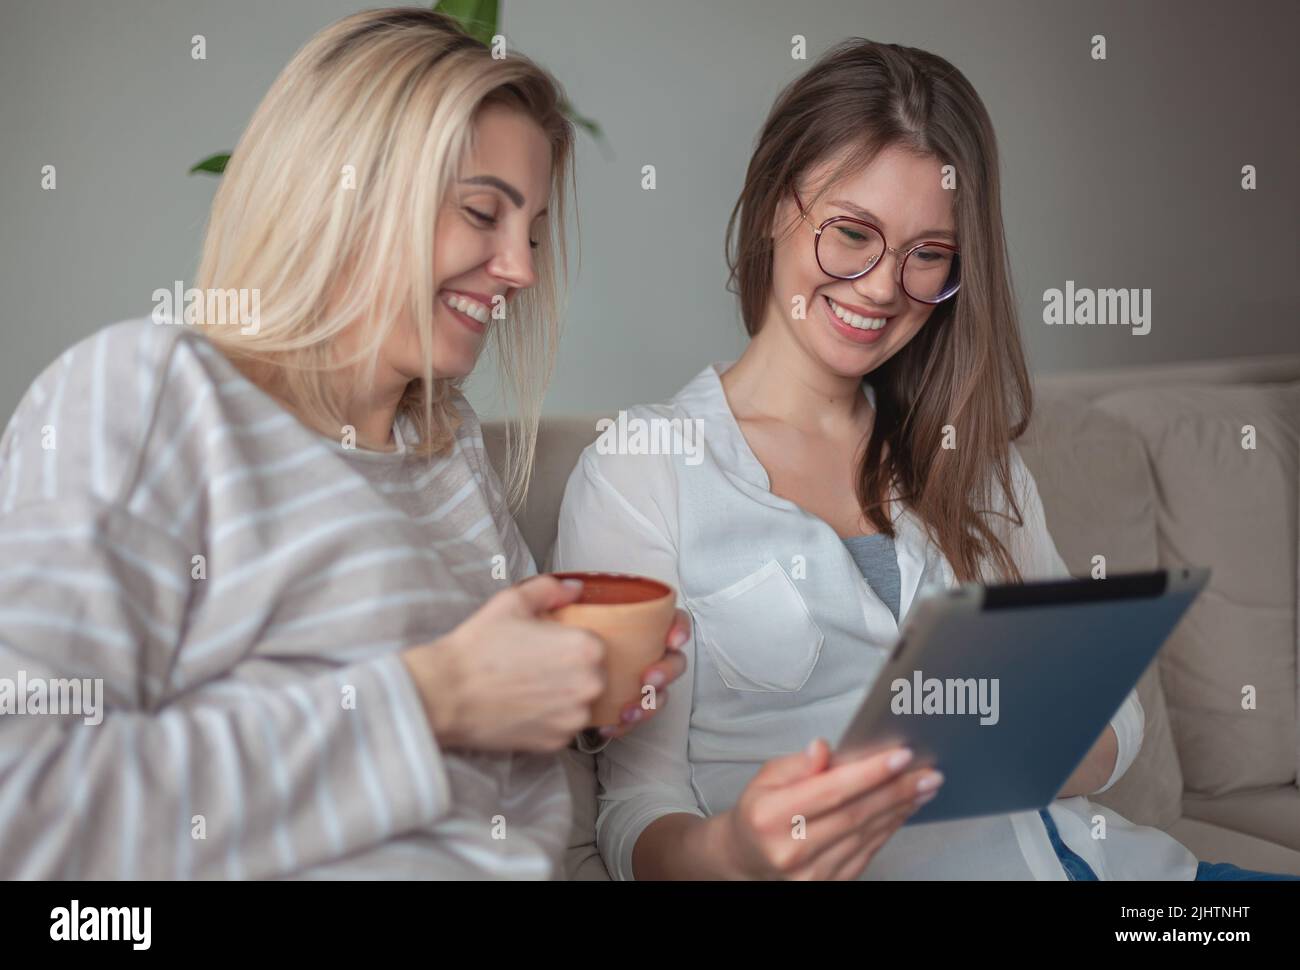 Two young women friends using tablet together, sitting on the co Stock Photo